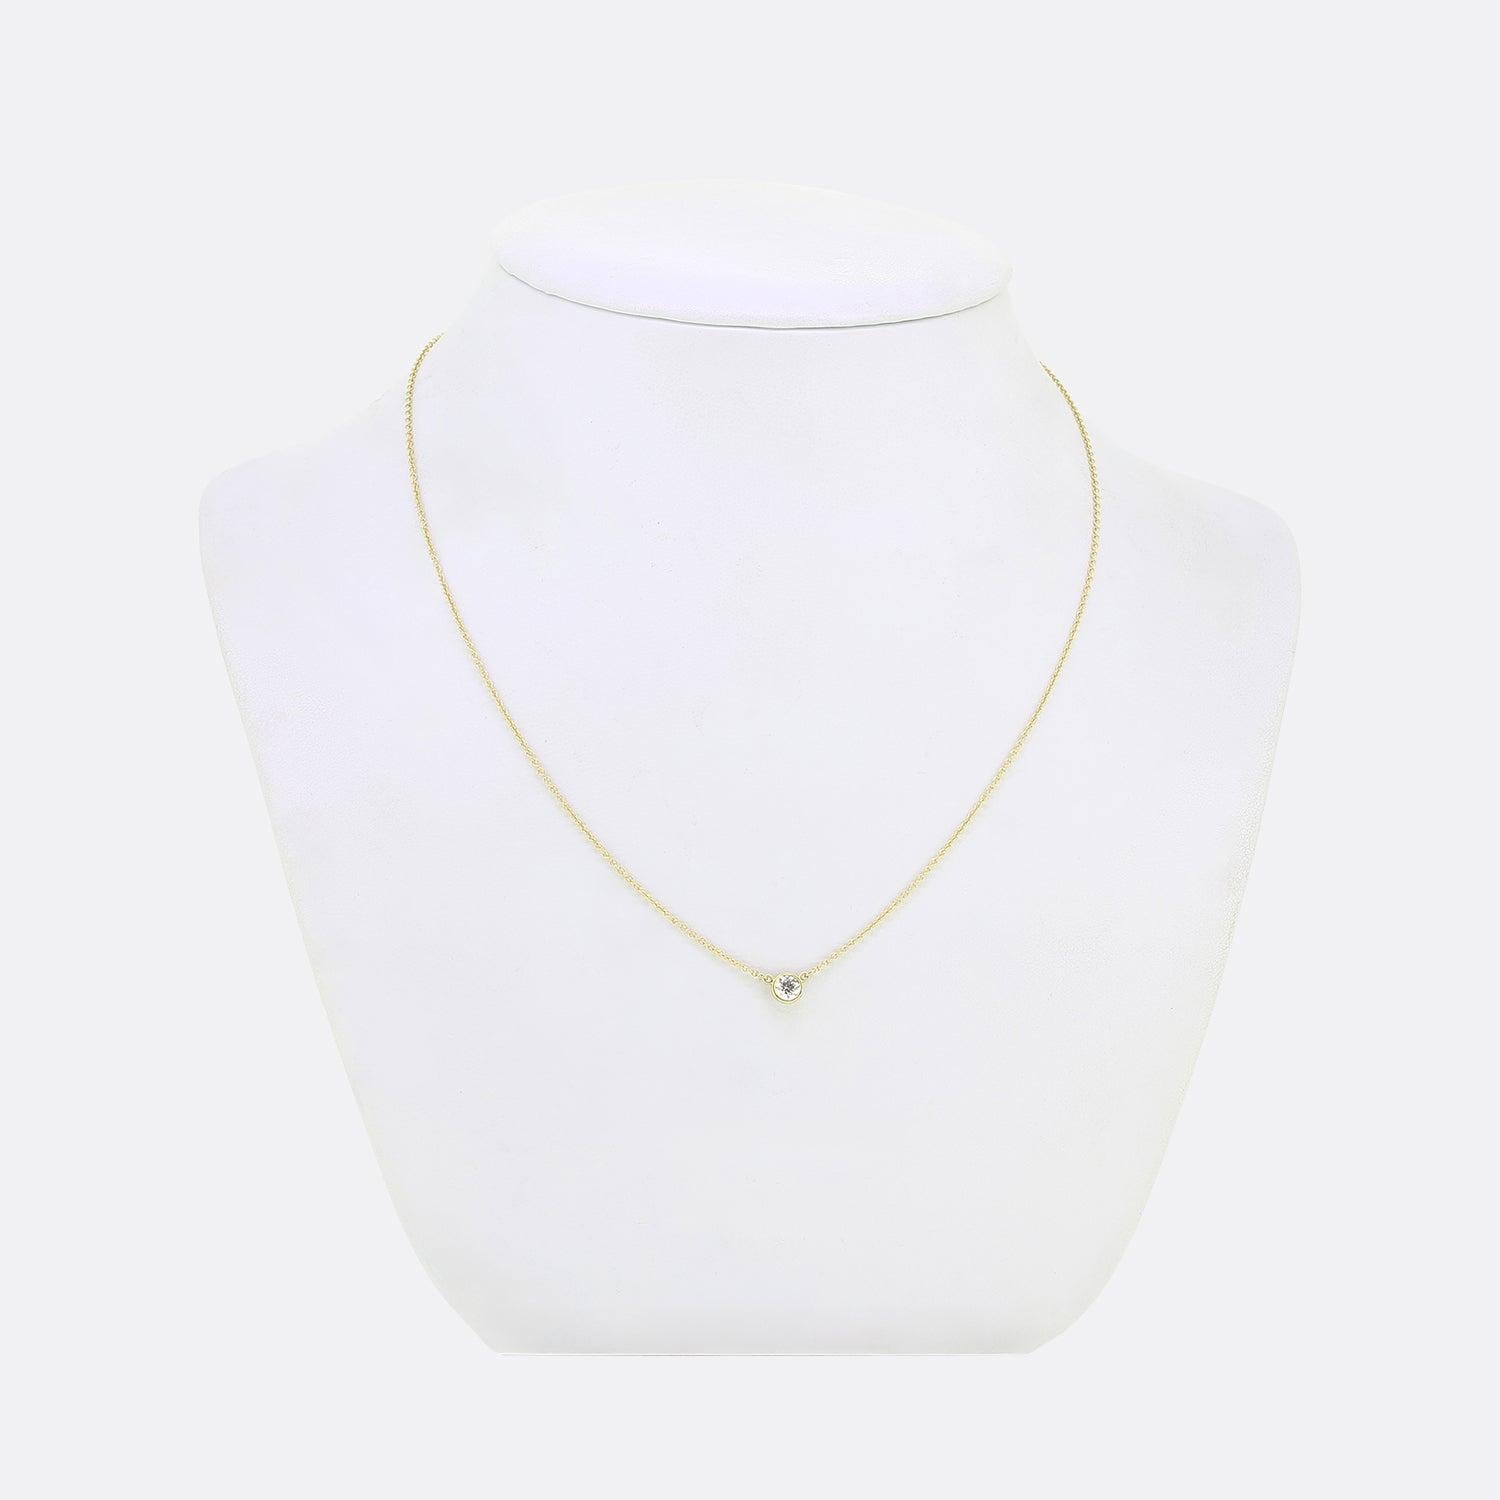 Here we have simple yet elegant necklace from the world renowned jewellery designer, Tiffany & Co. A single hand-polished diamond which shines at the centre of a delicate and refined rub-over setting hangs from a slim signed 18ct yellow gold belcher